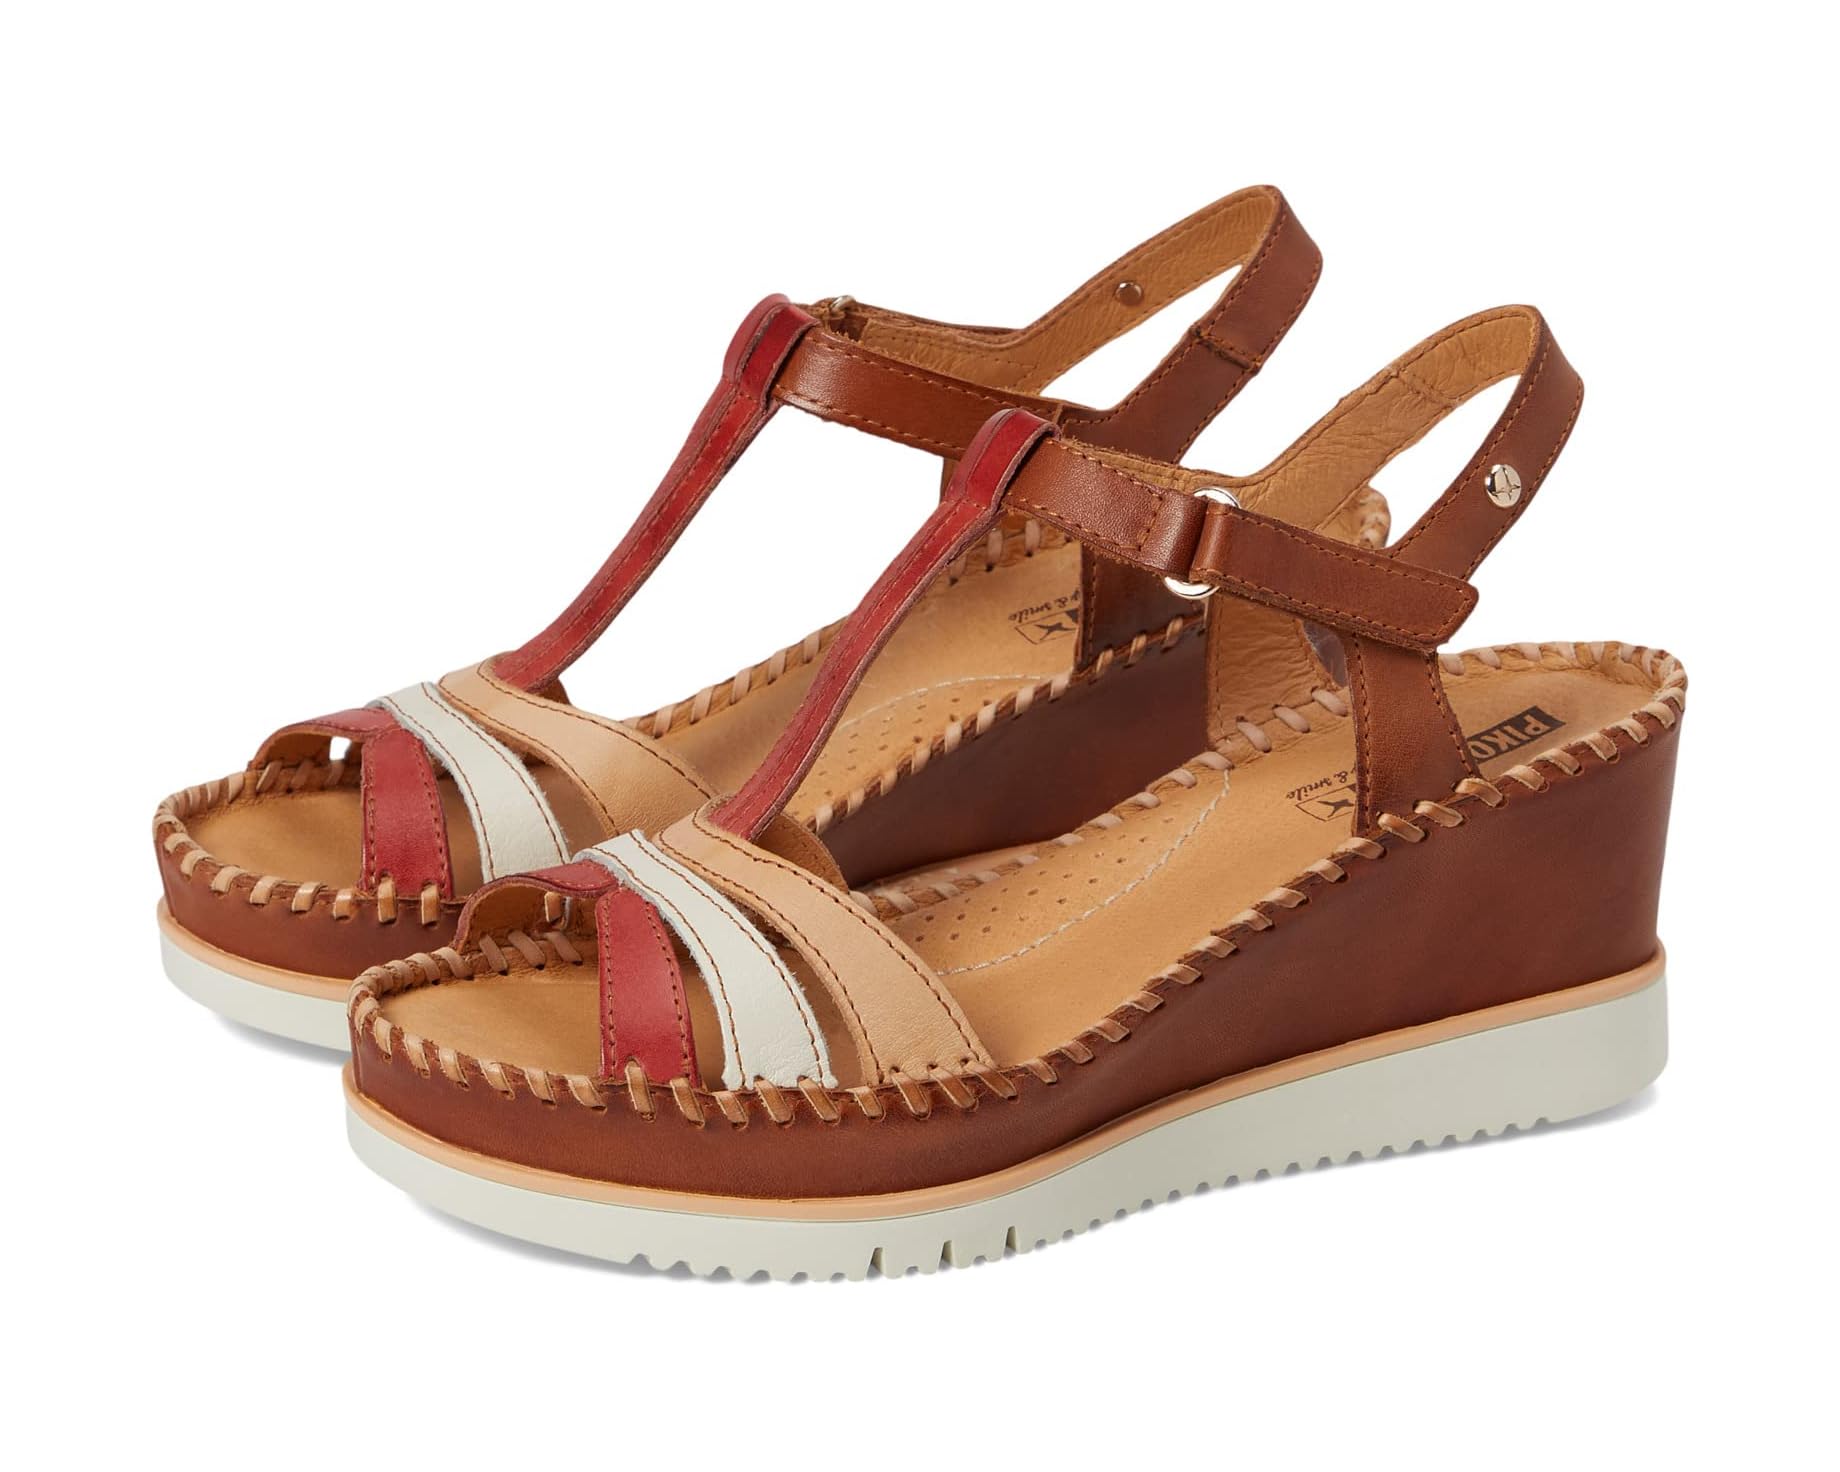 Pikolinos Aguadulce Wedge Sandals Women's 7